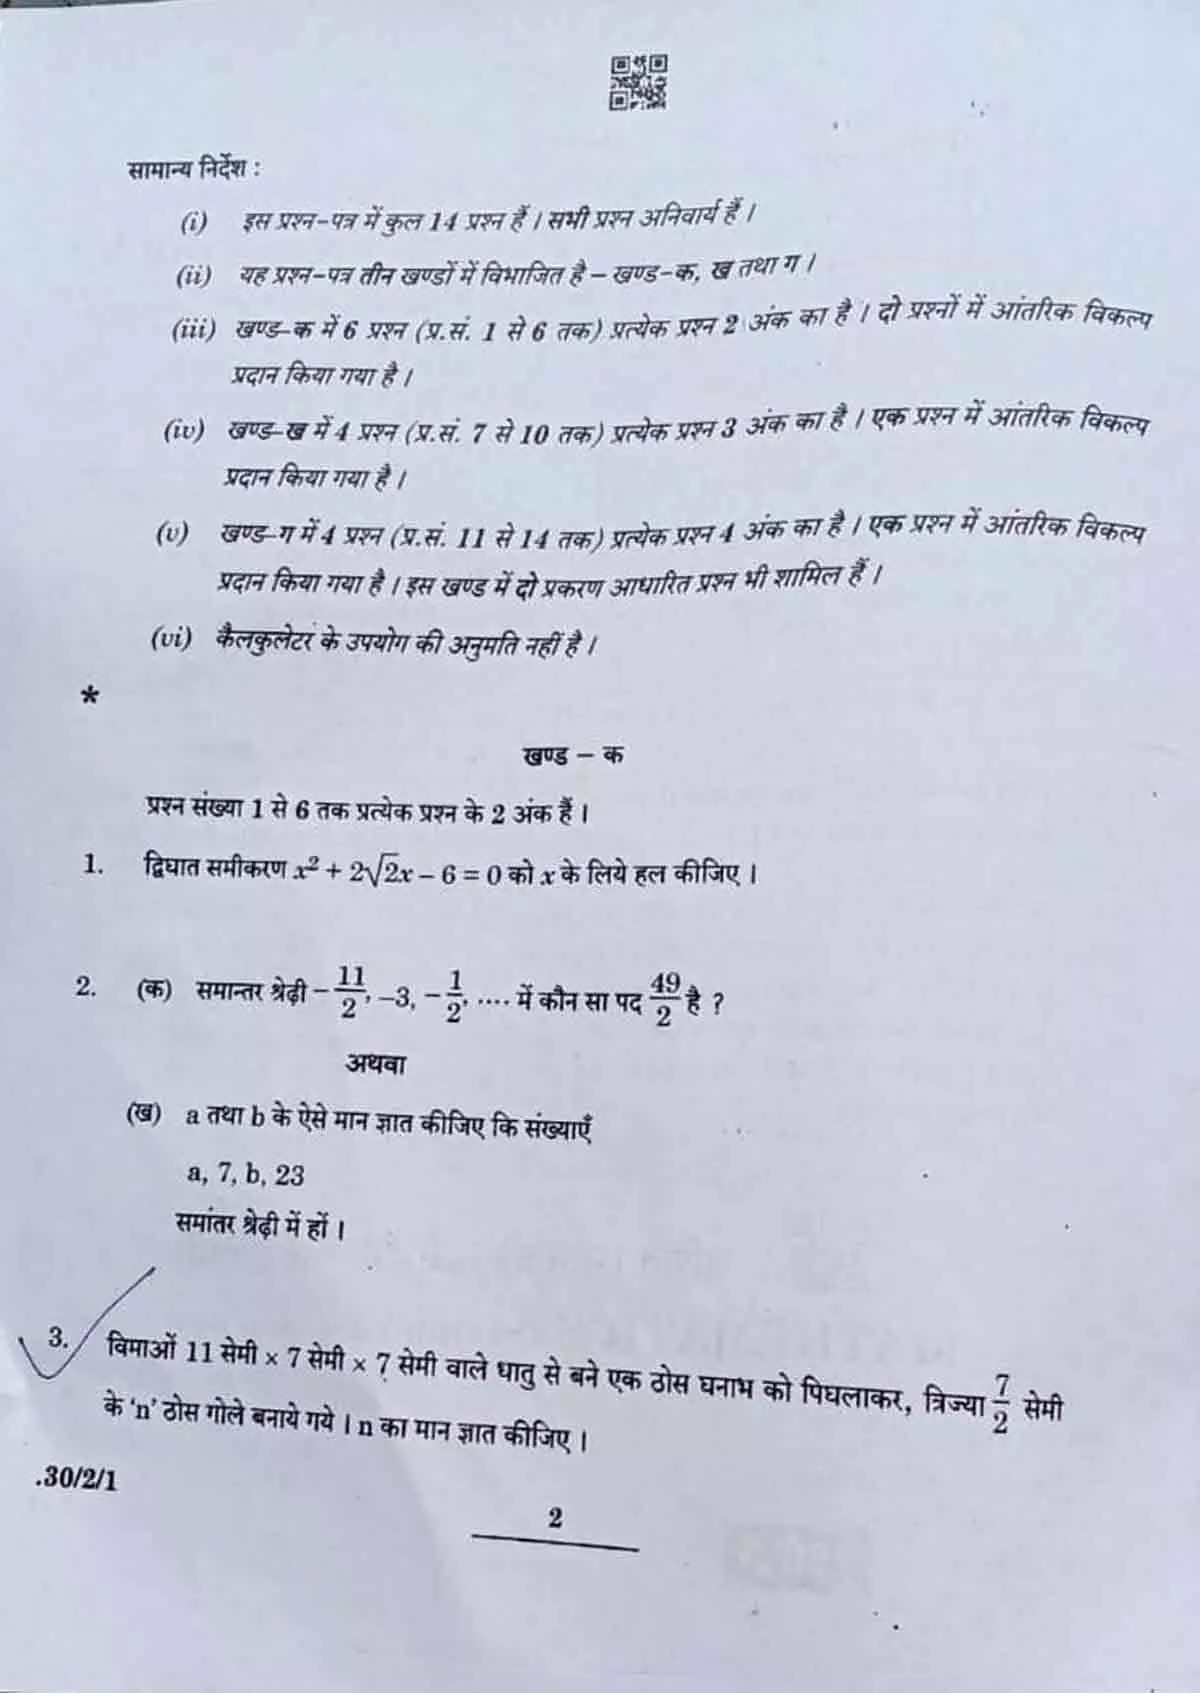 CBSE Class 10th Question Paper Page 2